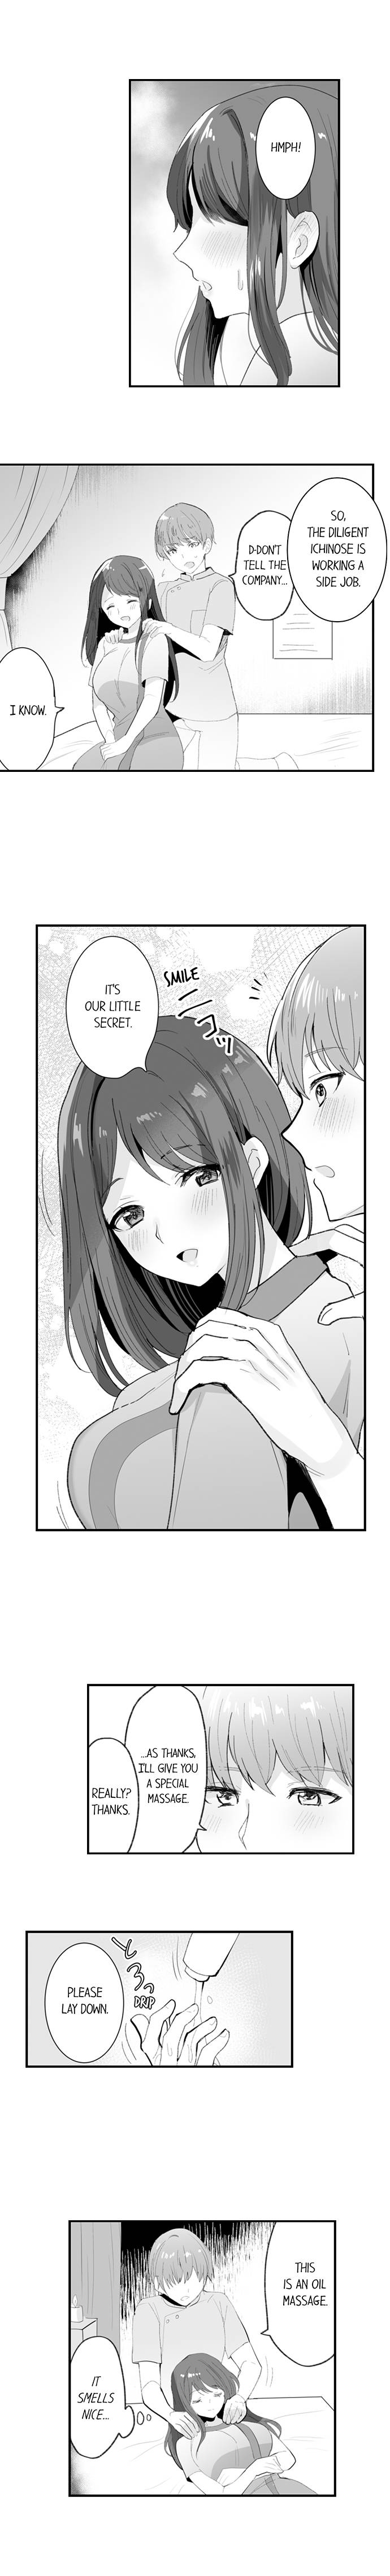 The Massage ♂♀ The Pleasure of Full Course Sex Chapter 7 - Page 3